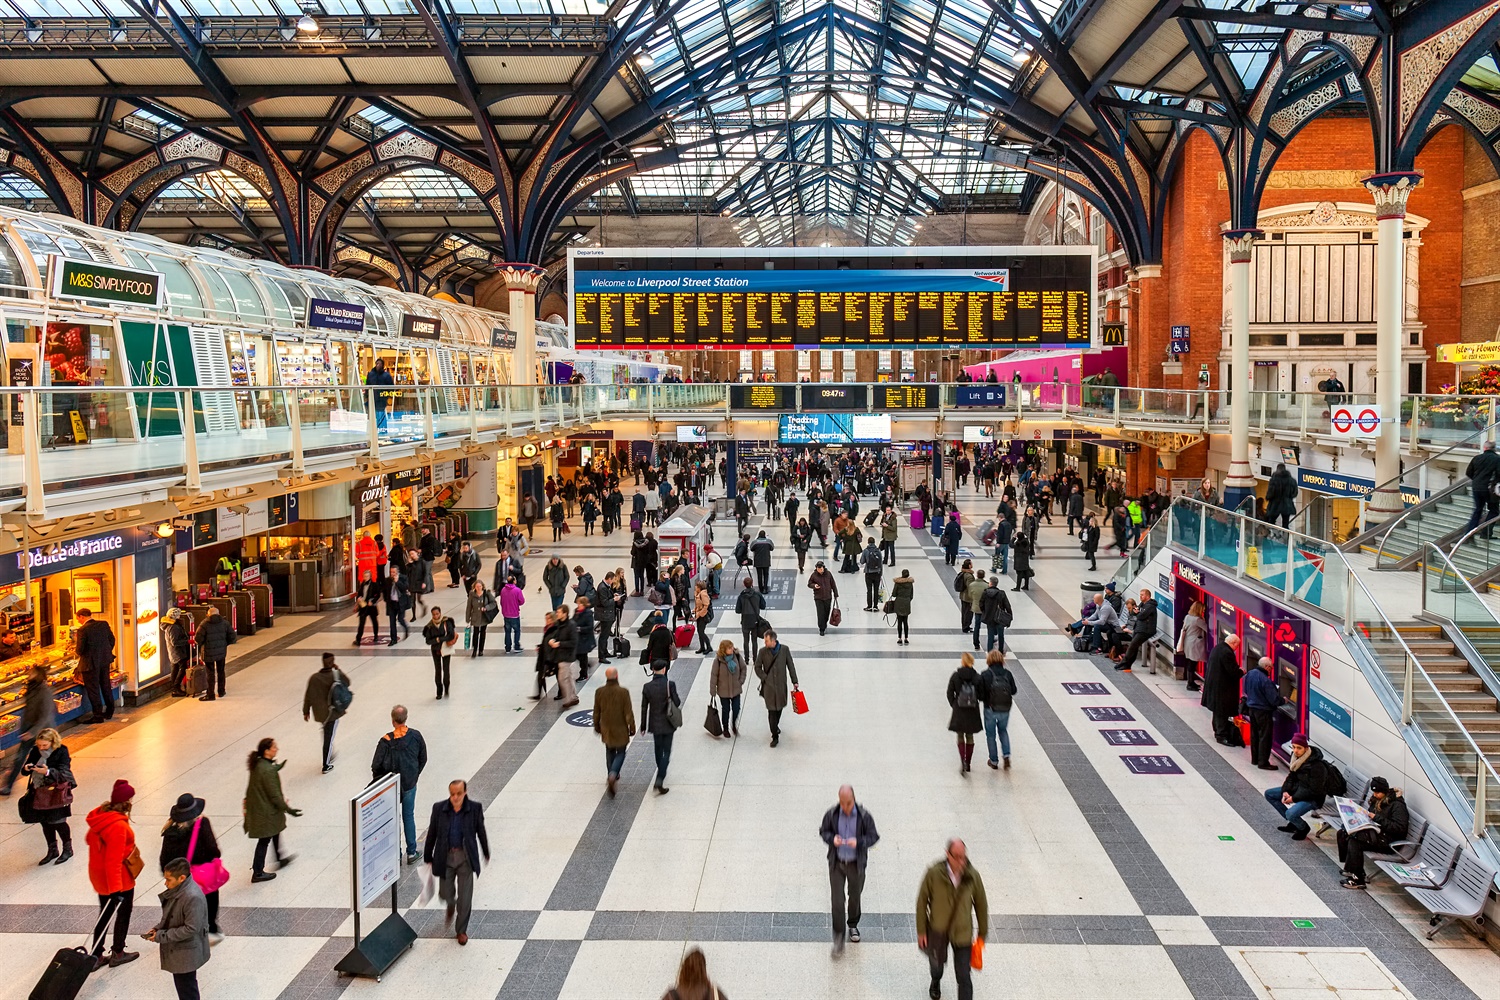 Developing London’s stations key to catering for population growth